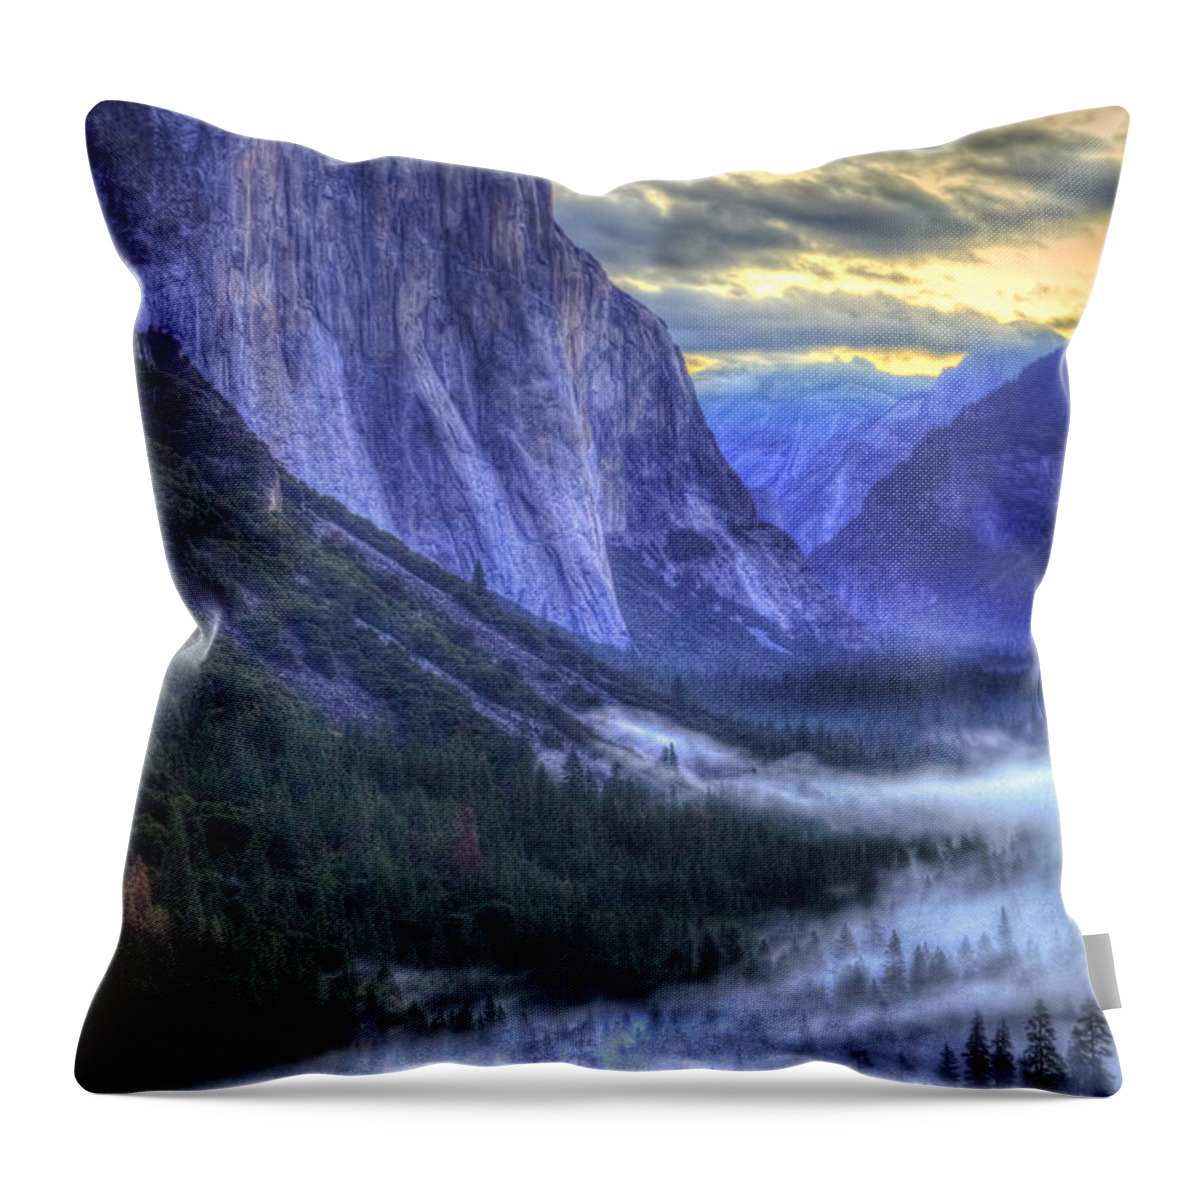 Landscape Throw Pillow featuring the photograph El Capitan by Jonathan Nguyen